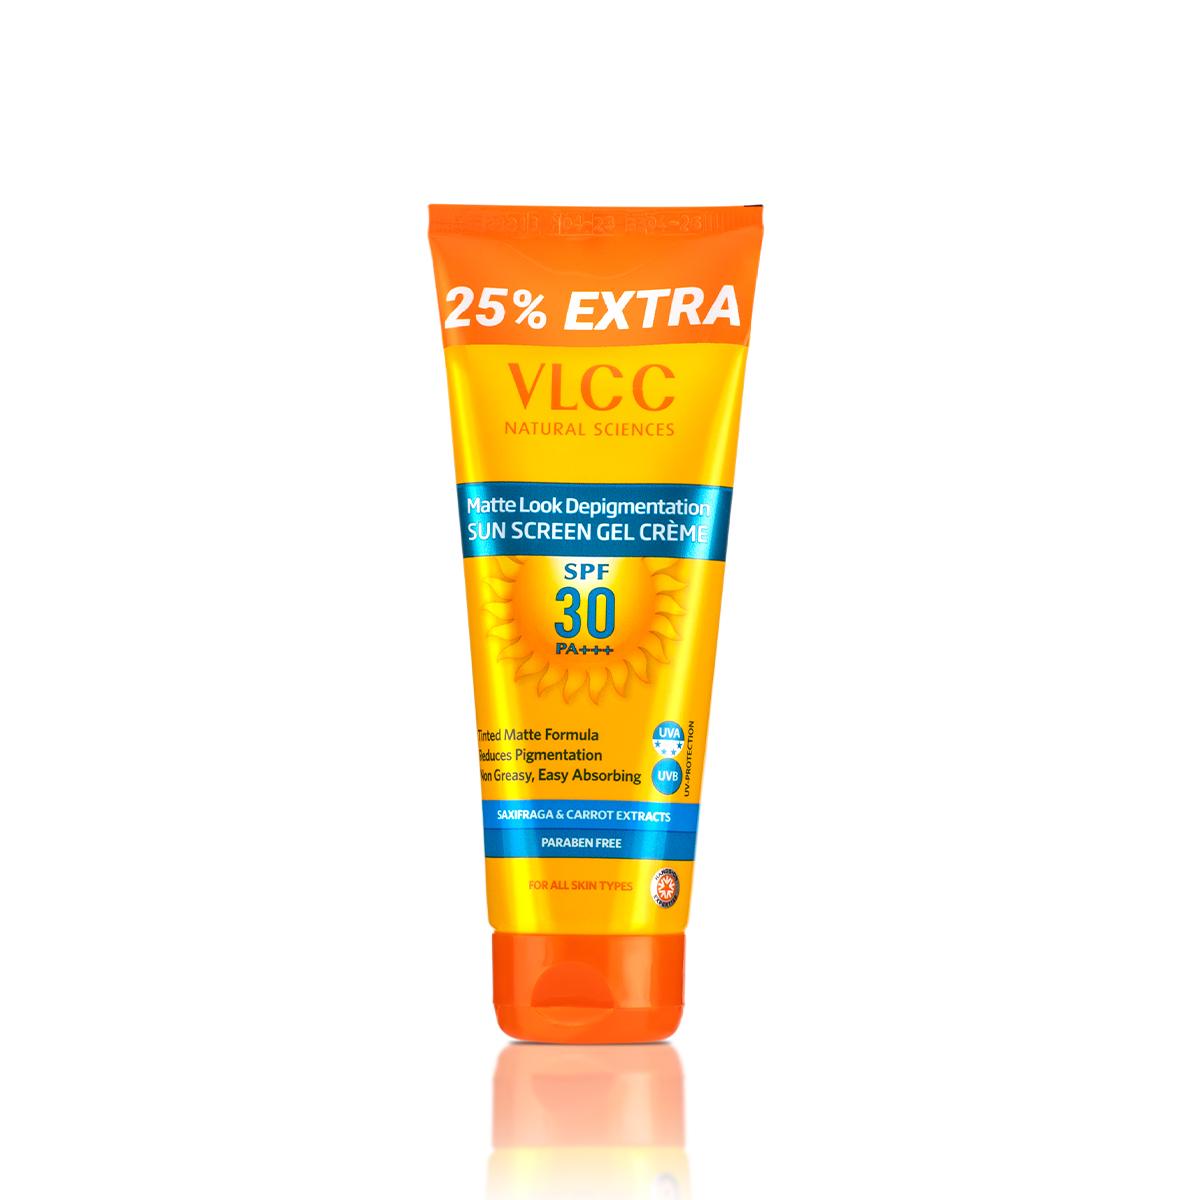 VLCC Matte Look SPF 30 PA++ Sunscreen - Stay Shine-Free with Effective Sun Protection